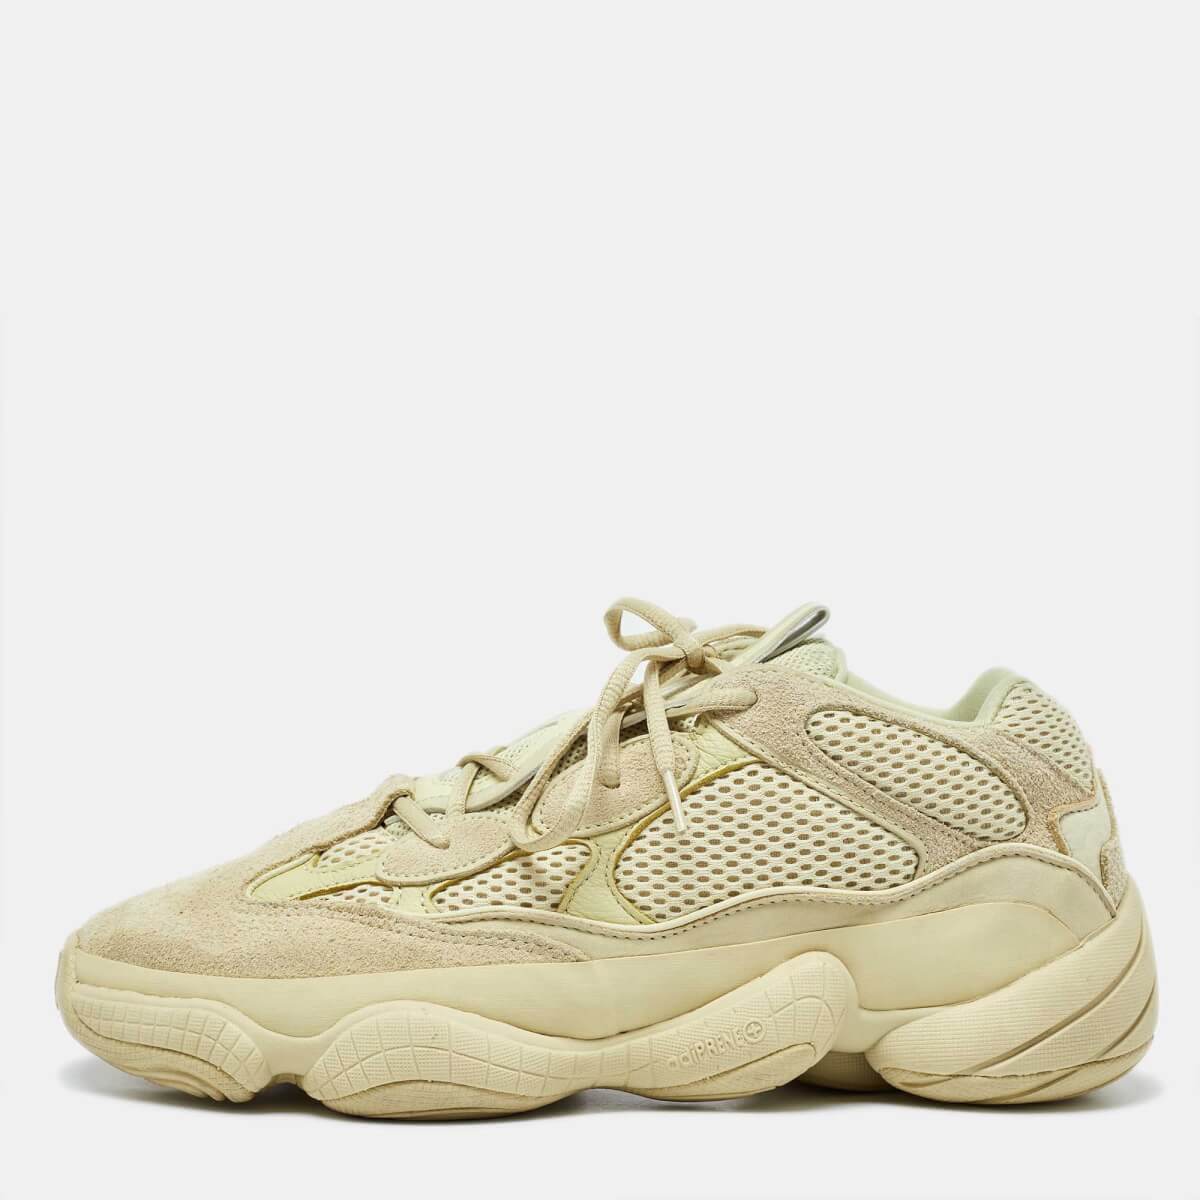 Yeezy x Adidas Light Yellow Suede and Mesh Yeezy 500 Low Top Sneakers Size 45.5